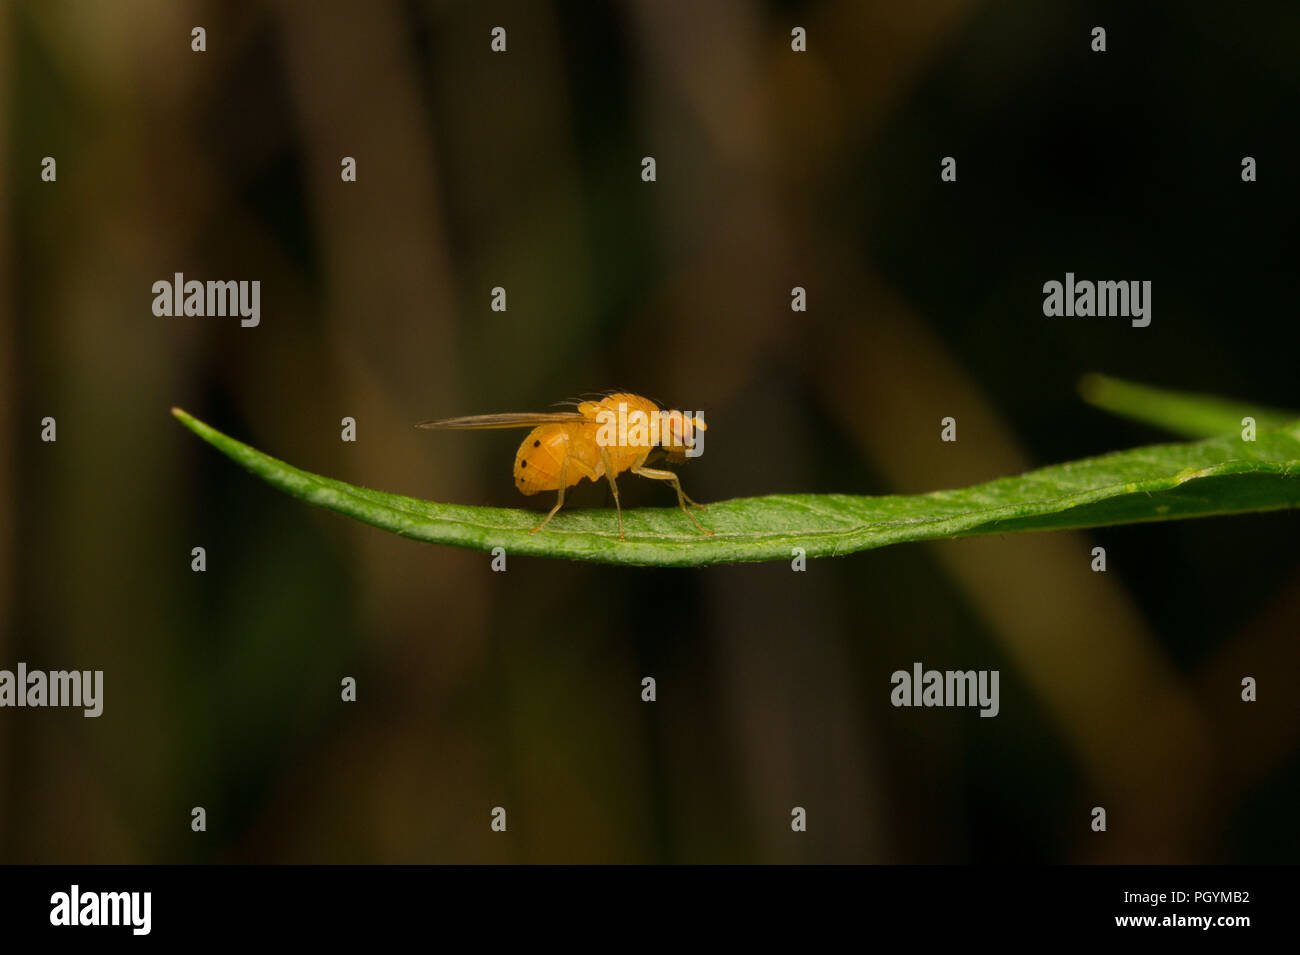 SONOrange fruitfly resting on a juicy green leaf, isolated against a blurry black and brown background. Stock Photo